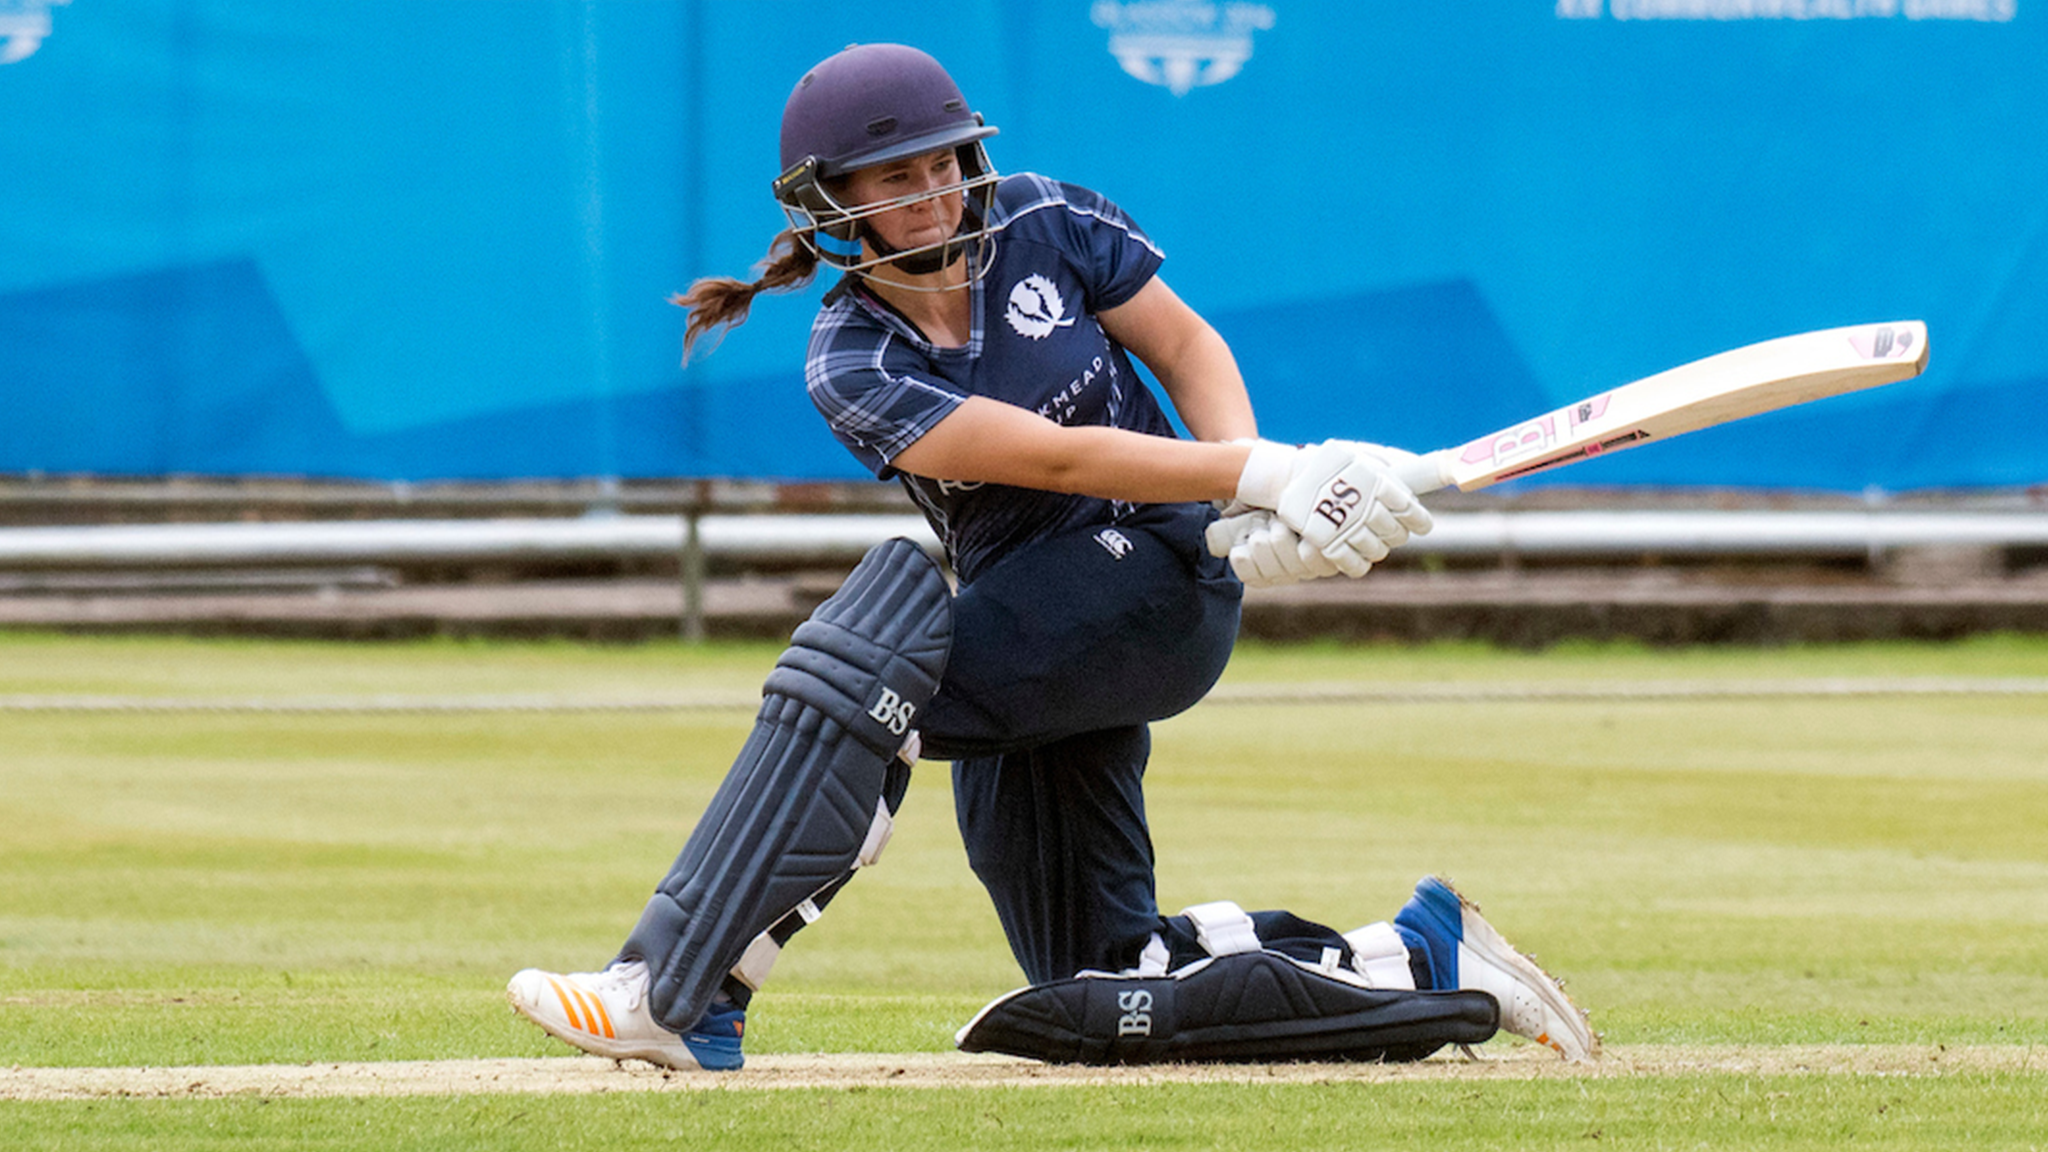 Kathryn Bryce Looks Forward to a “Huge Opportunity” for Scotland